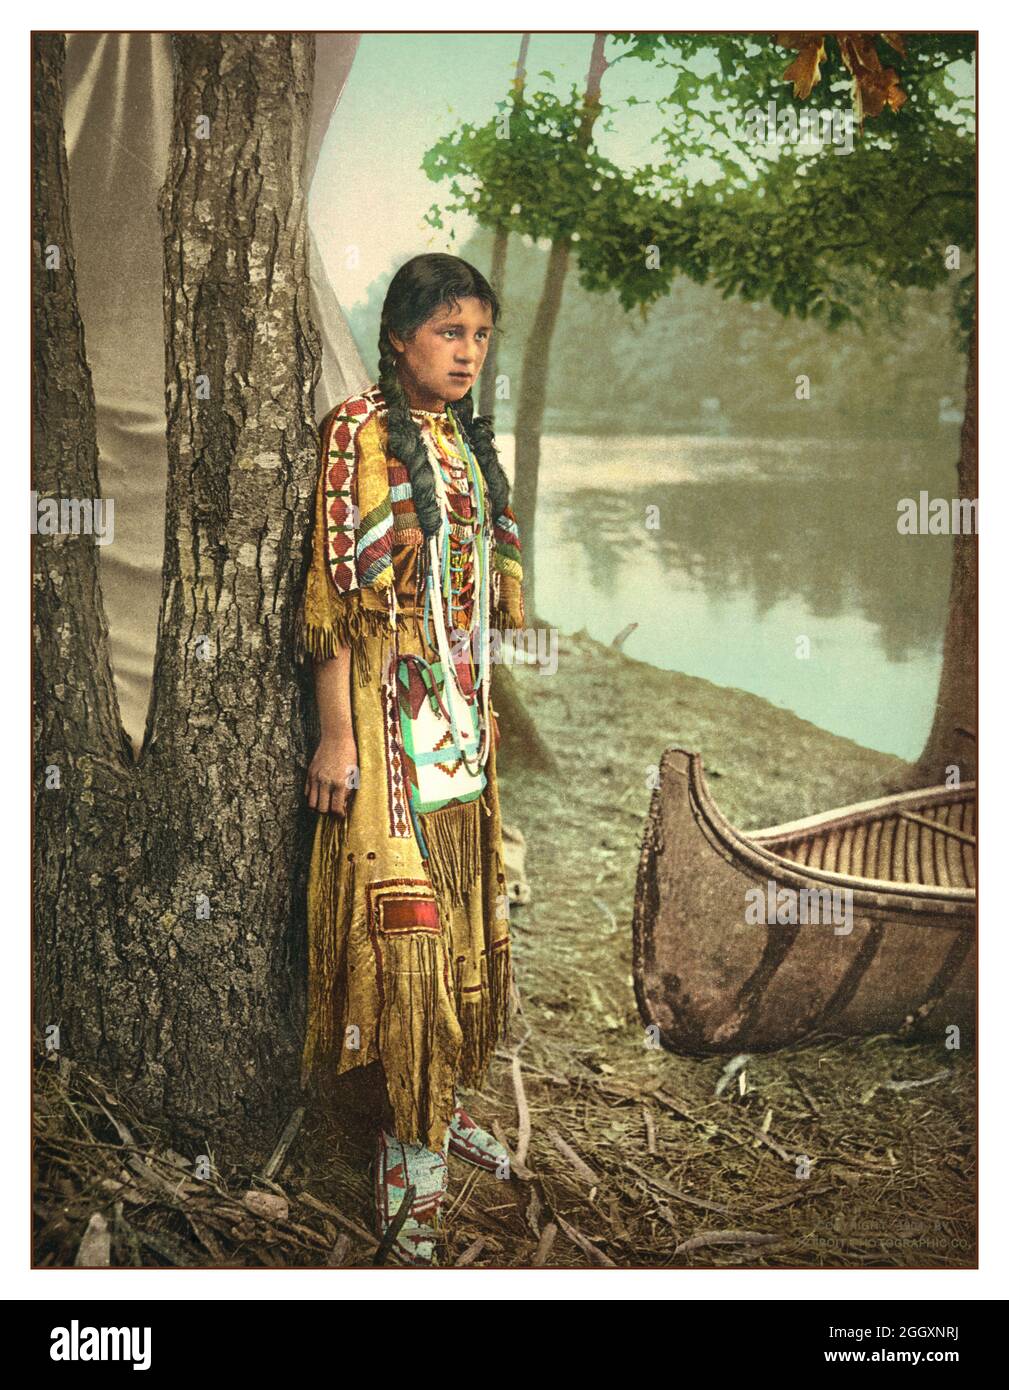 Vintage 1900s Minnehaha Photochrom Colour Image with canoe Minnehaha is a fictional Native American woman documented in Henry Wadsworth Longfellow's 1855 epic poem The Song of Hiawatha. She is the lover of the titular protagonist Hiawatha and comes to a tragic end. The name, often said to mean 'laughing water', literally translates to 'waterfall' or 'rapid water' in Dakota. Stock Photo